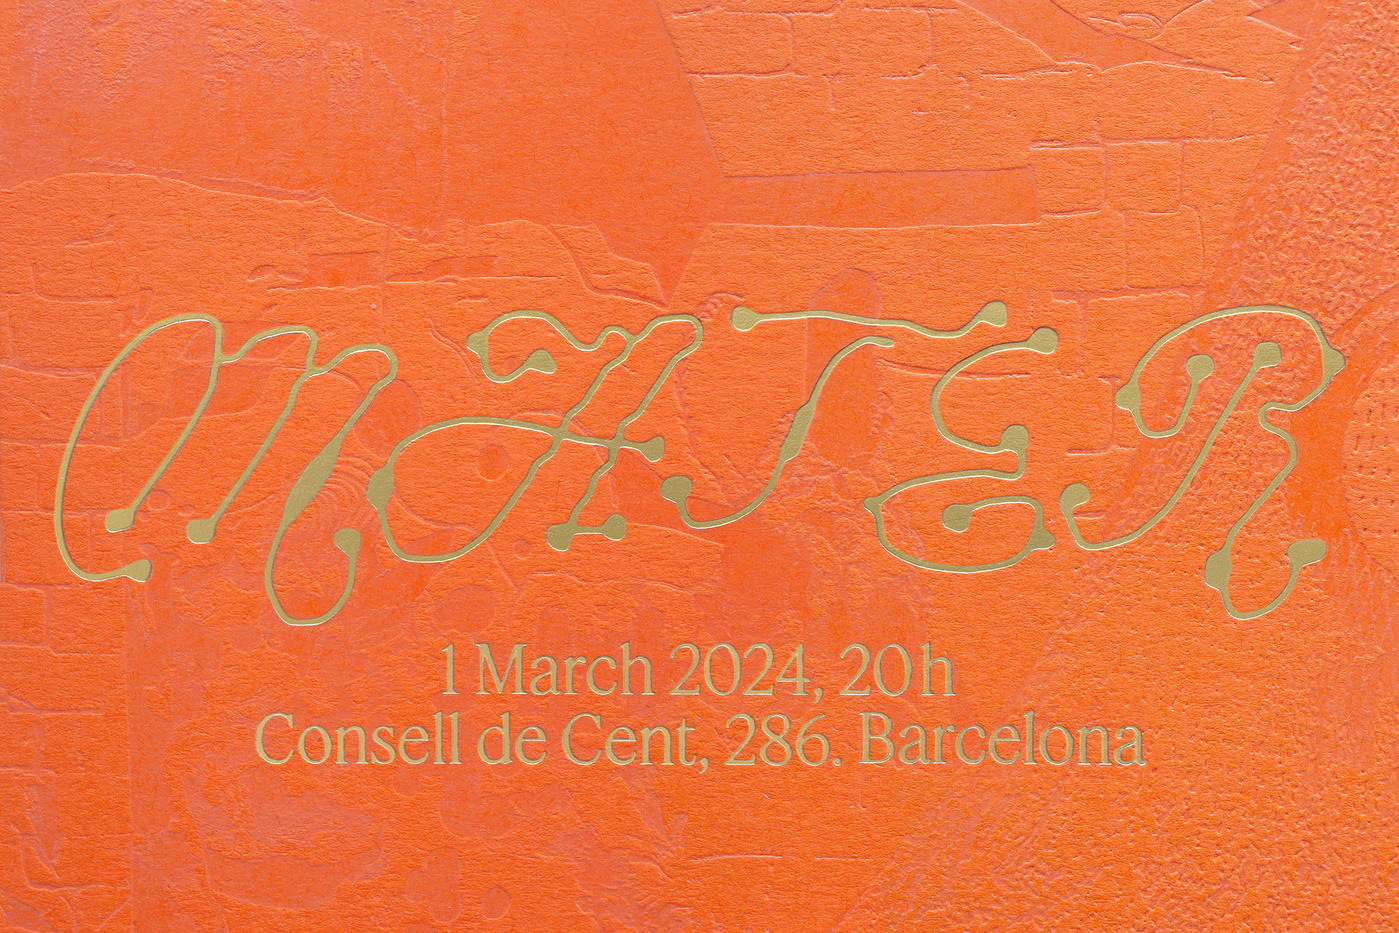 “Mater” exhibition